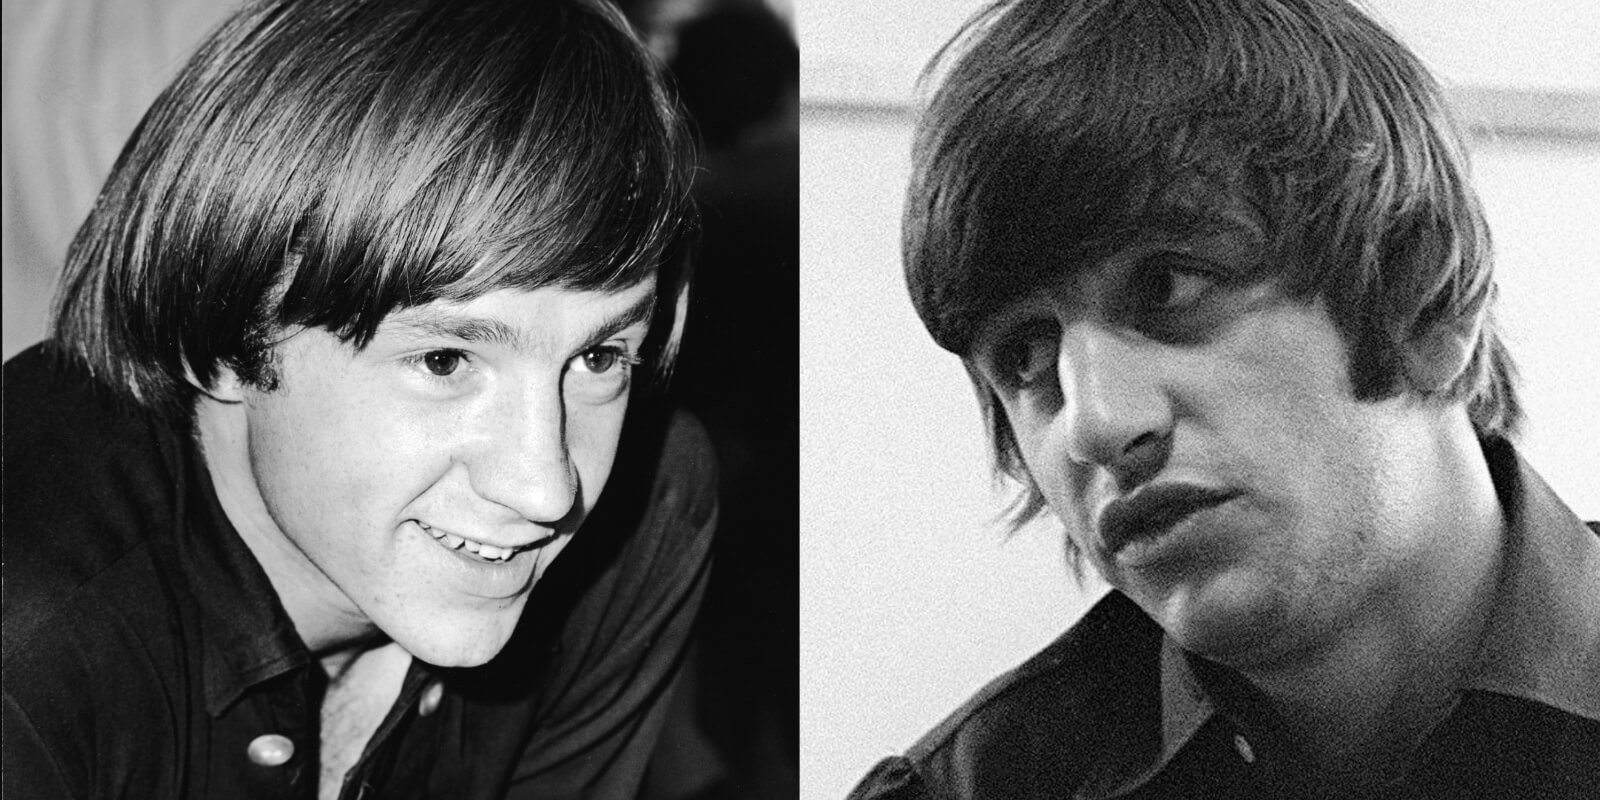 Peter Tork and Ringo Starr in side by side black and white photographs.